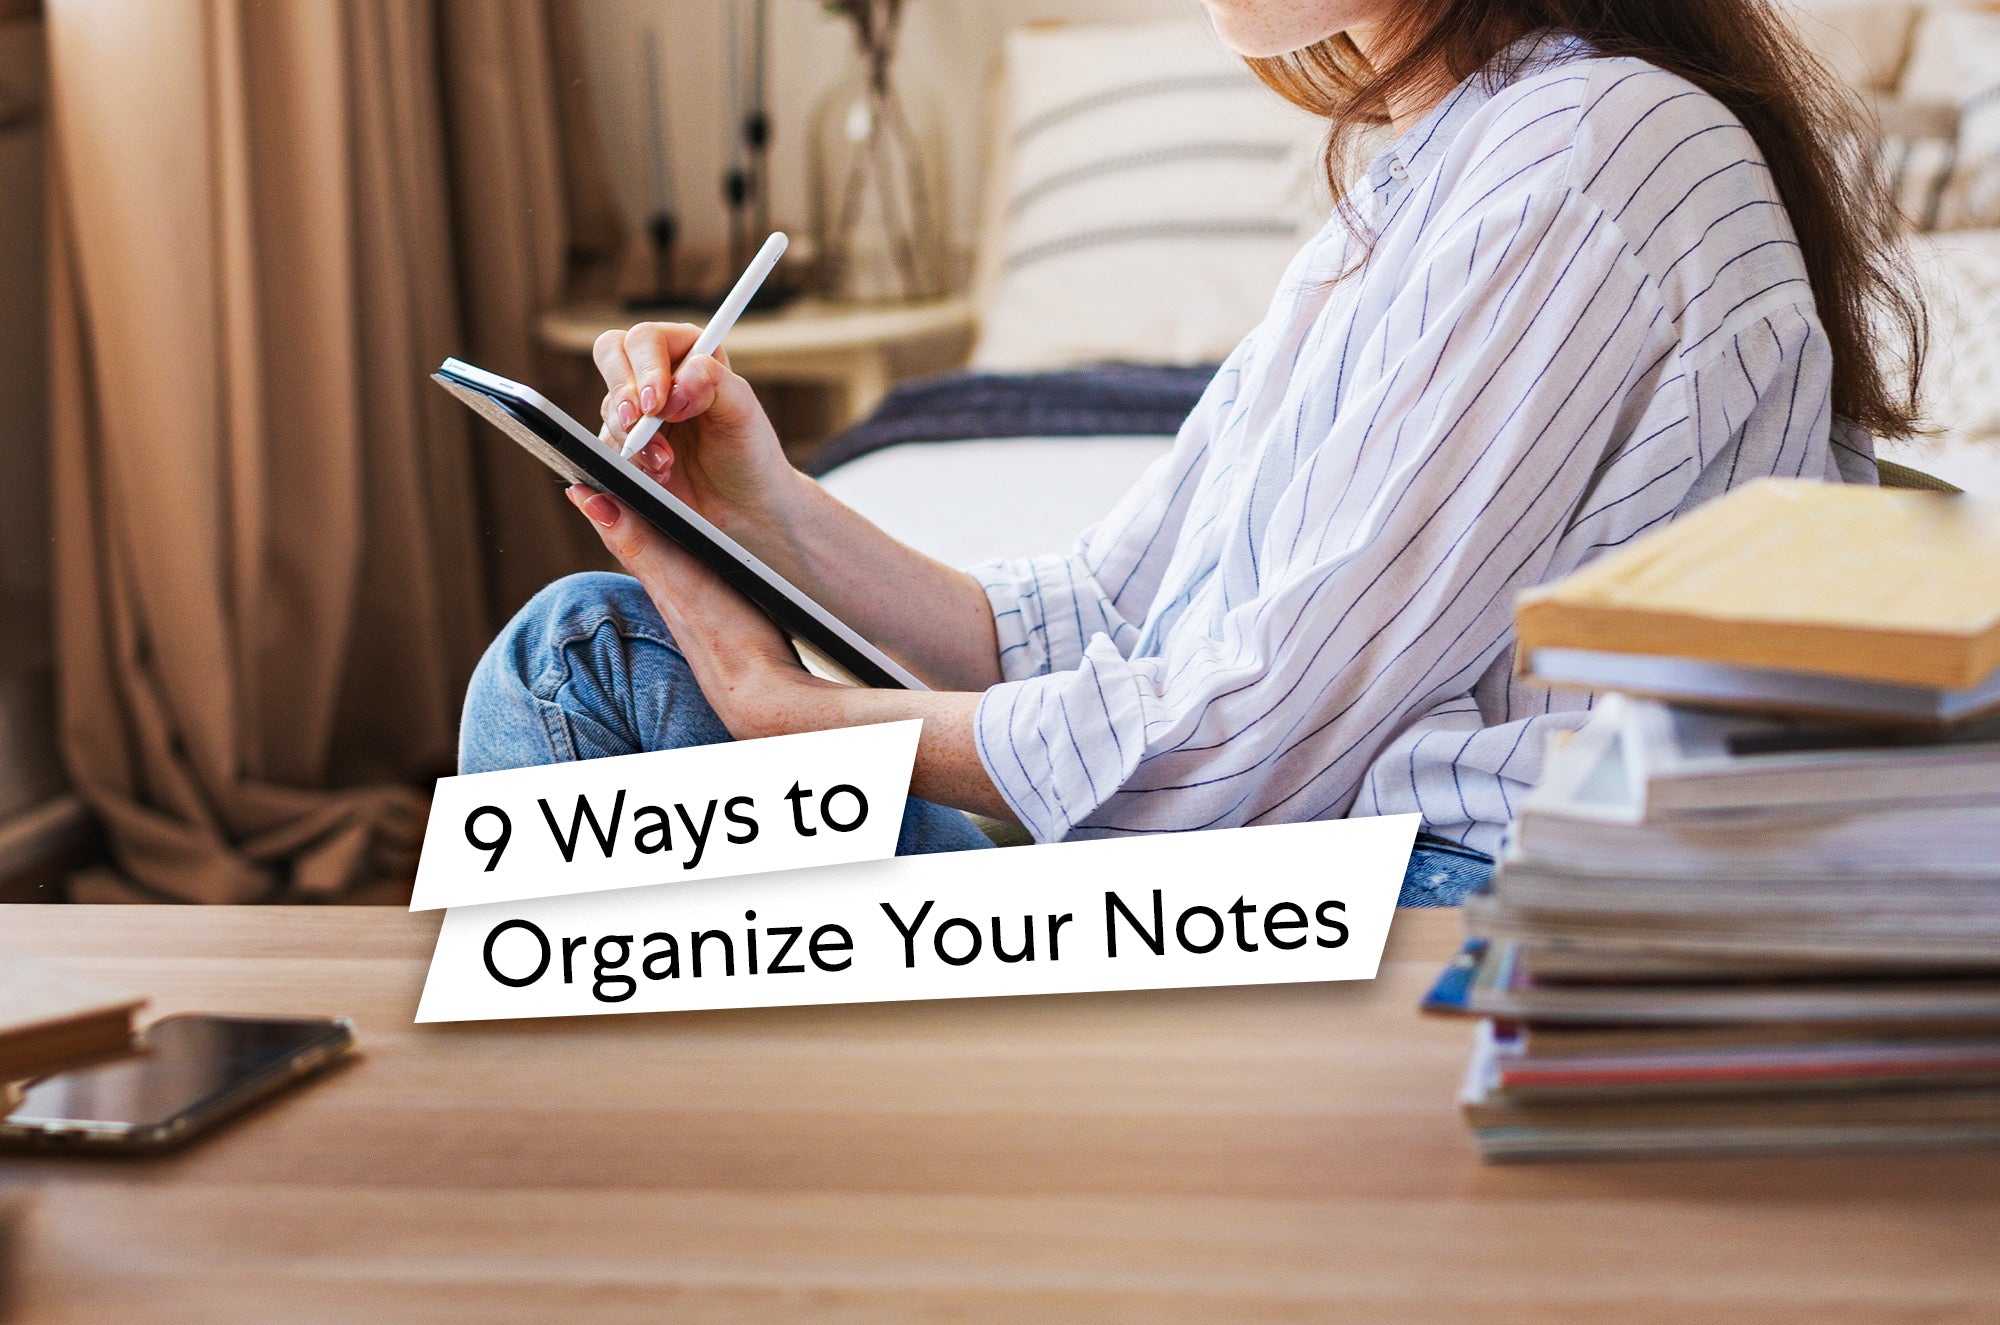 How to Organize Your Notebook With Note Tabs - Portage Notebooks